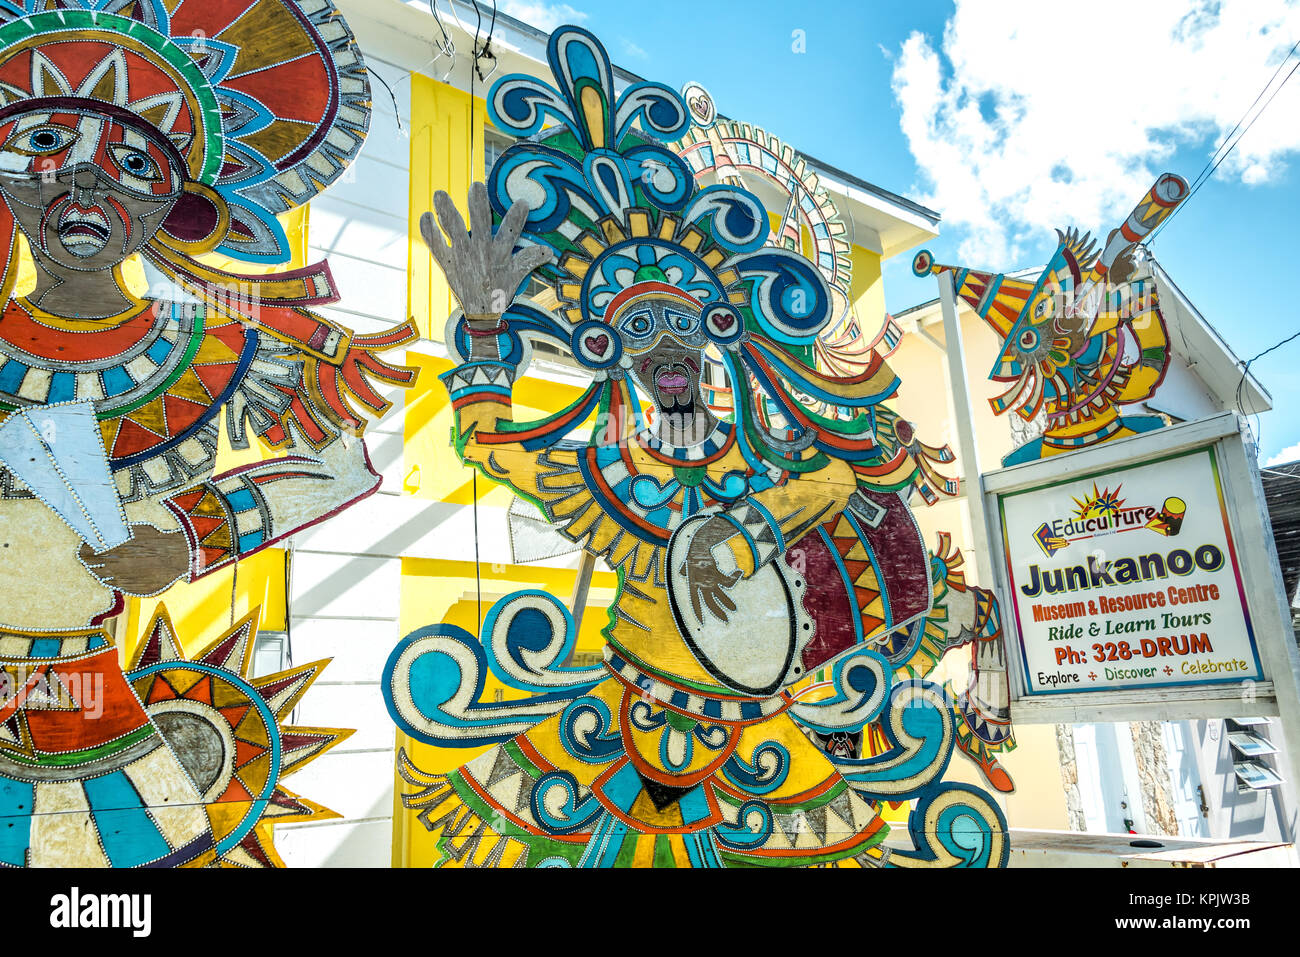 Colorful mural outside the Junkanoo Museum in Nassau, the Bahamas, celebrating the Bahamian festival and tradition with educational resources. Stock Photo